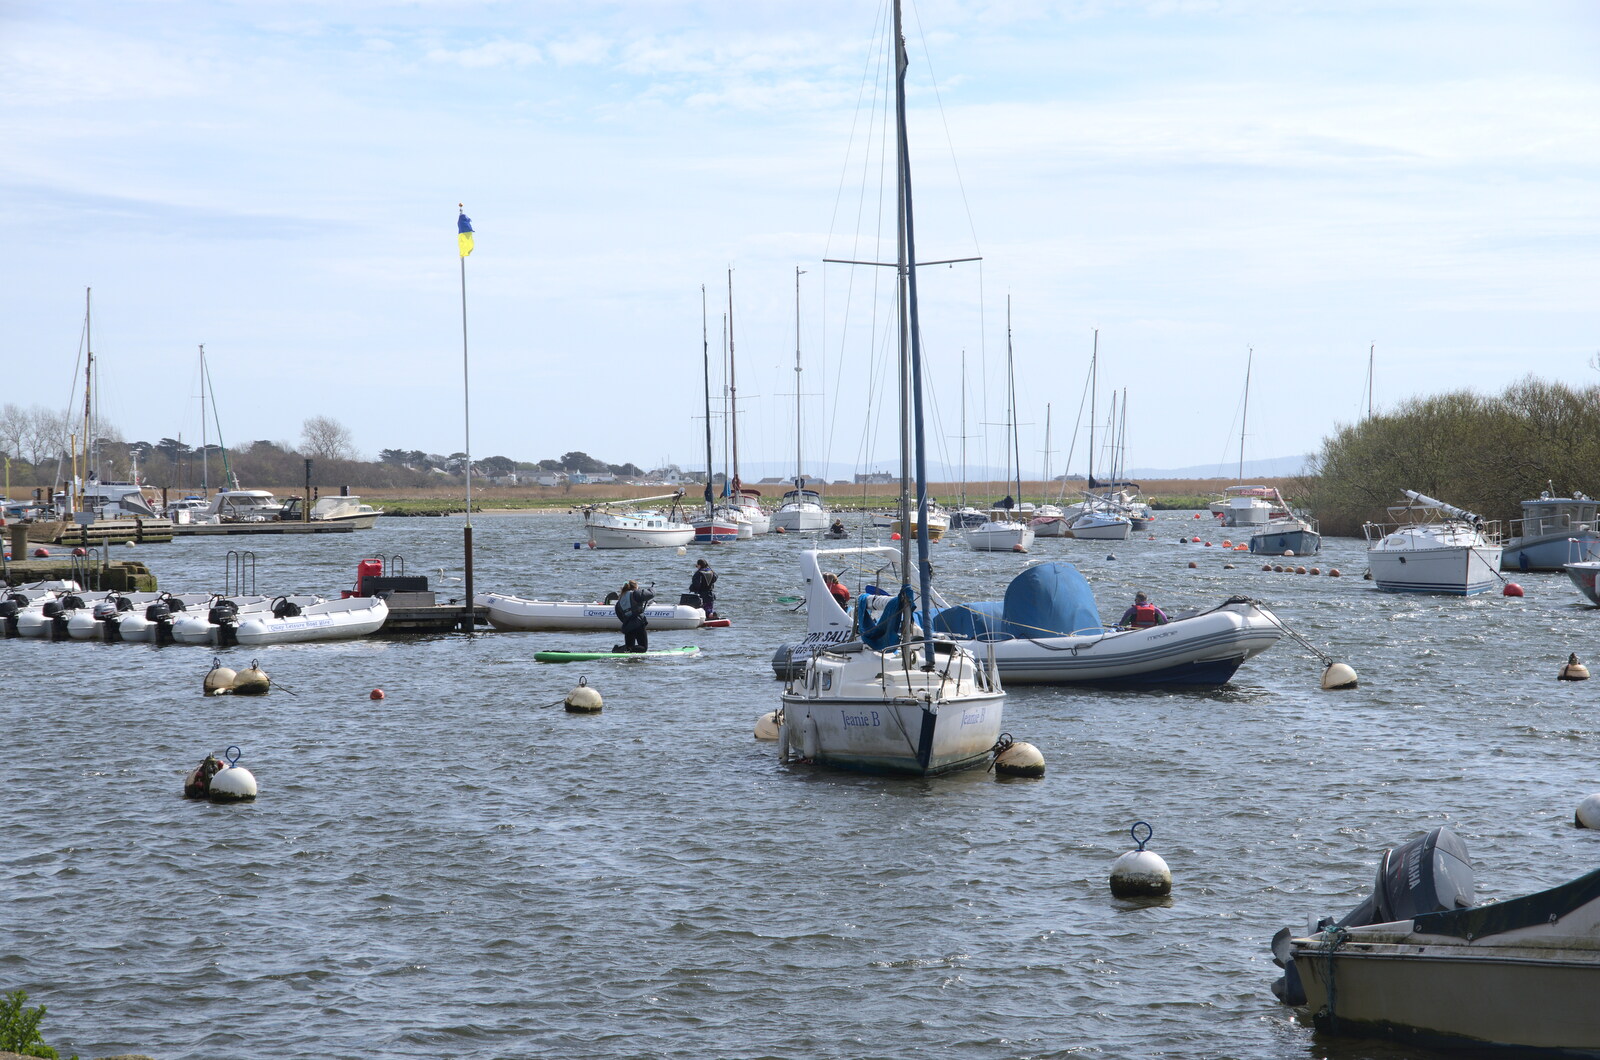 Bernice's Birthday and Walks Around New Milton and Lymington, Hampshire - 10th April 2022: Boats in the River Stour at Christchurch